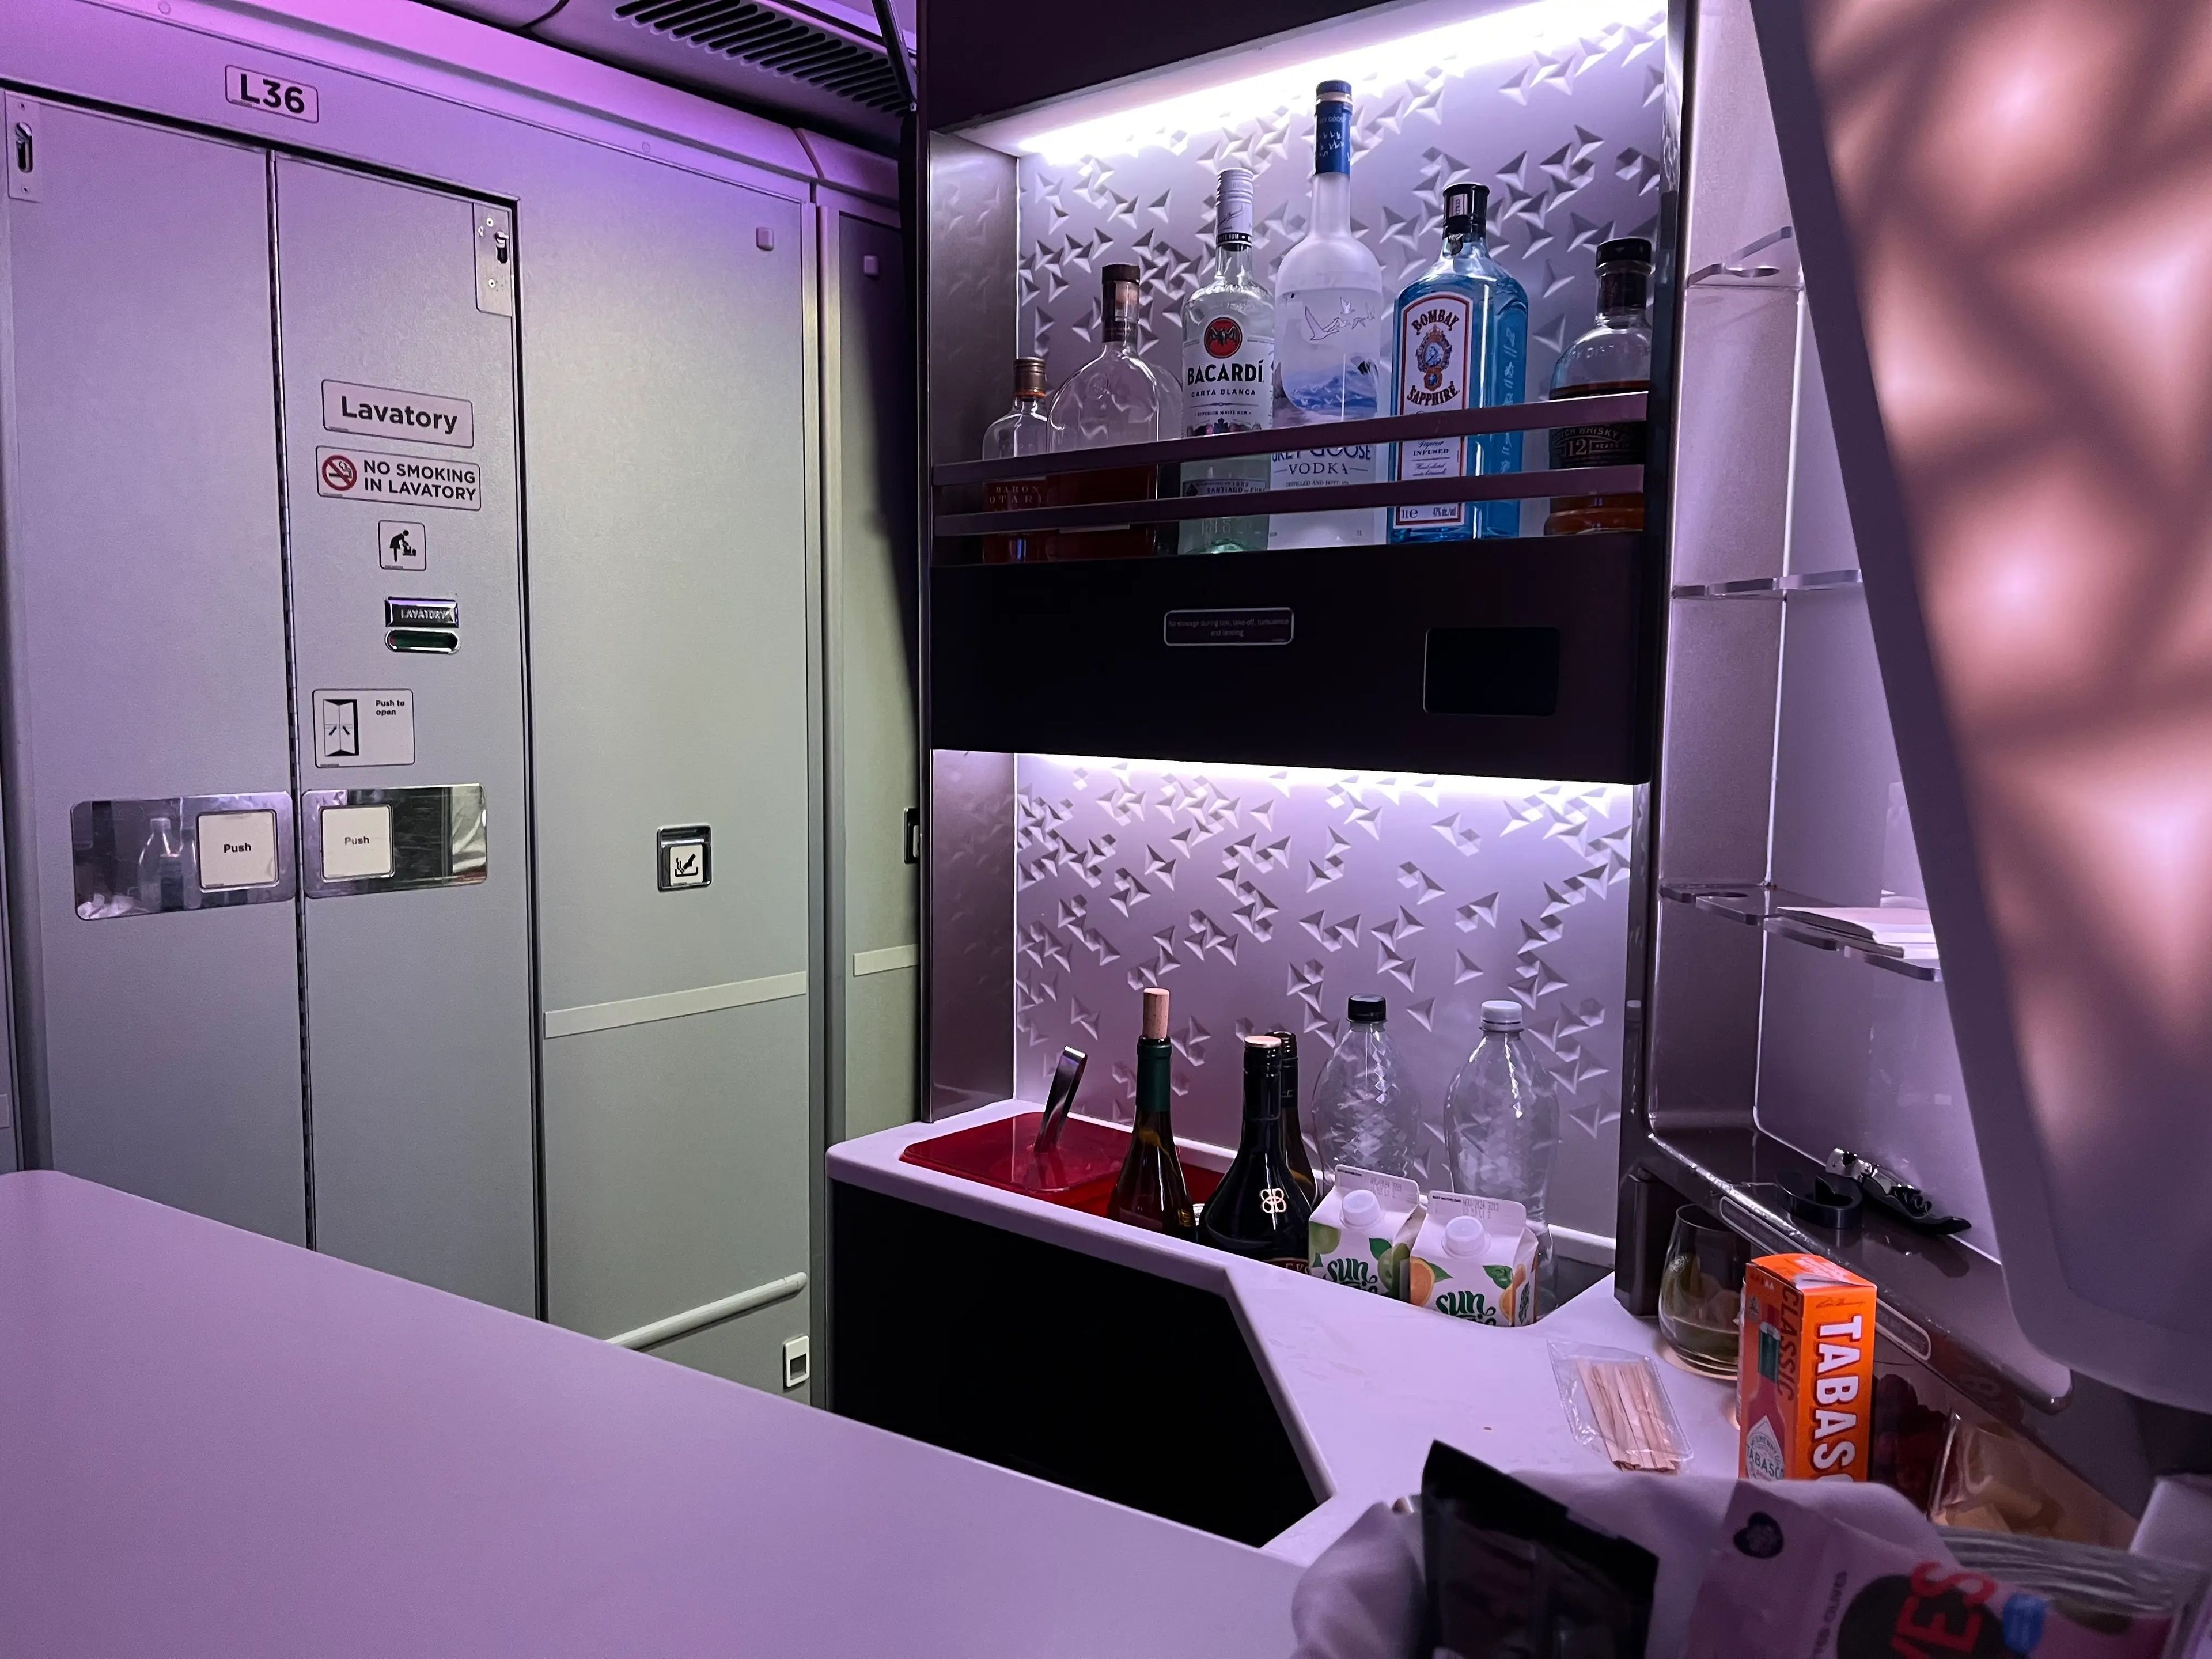 Airplane bar area with shelves stocked with Bacardi, Grey Goose, orange juice, and other mixers